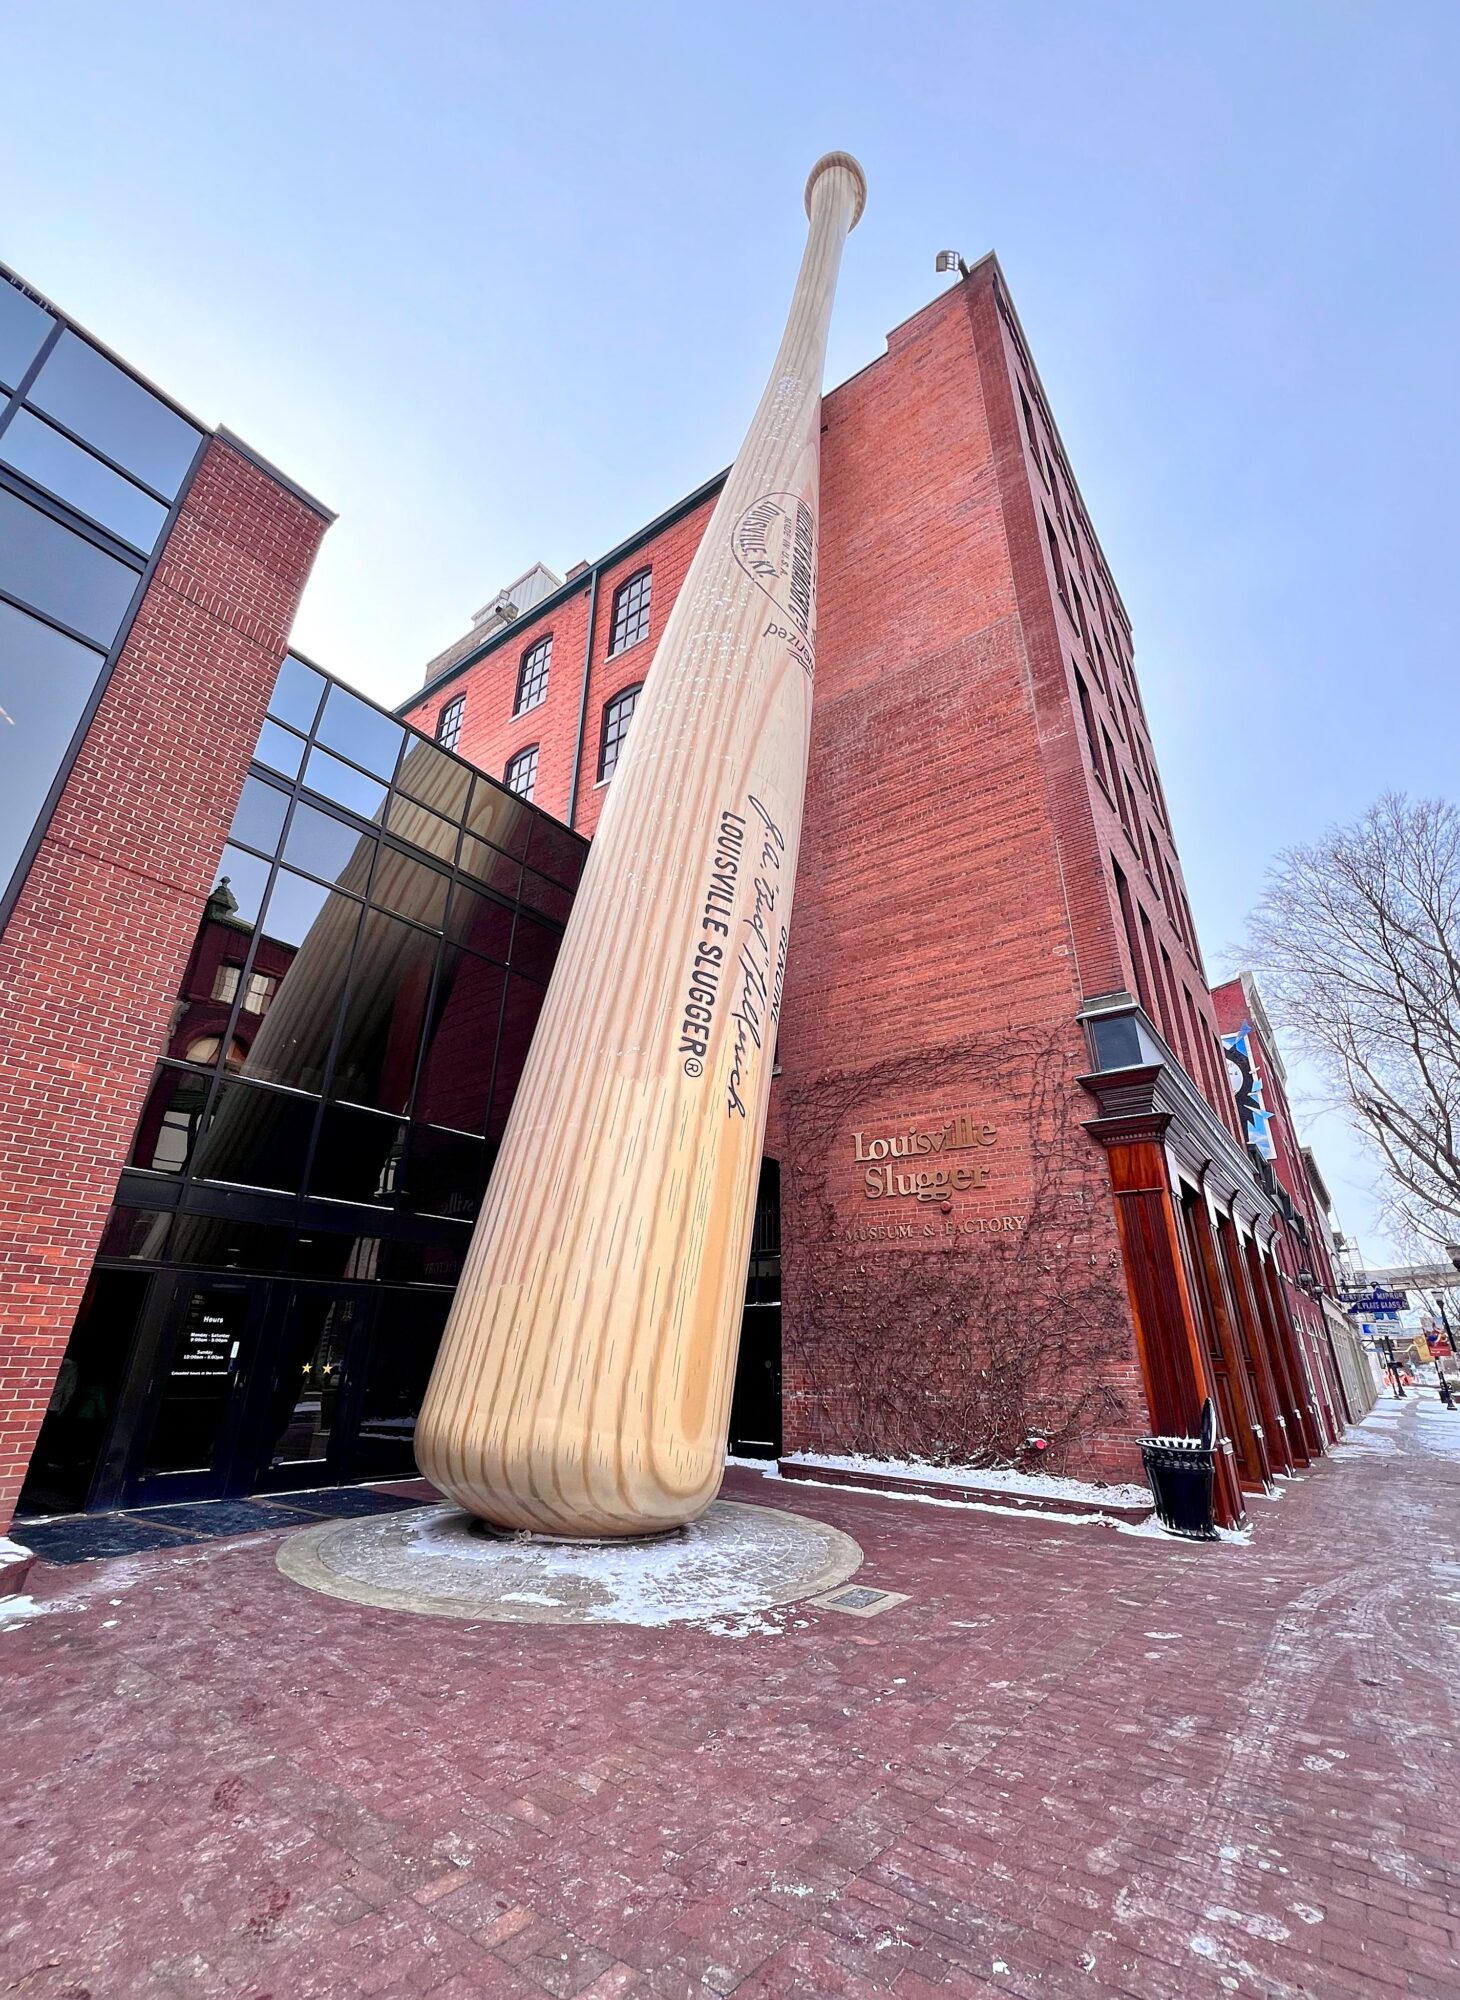 The large baseball bat outside the Louisville Slugger Museum and Factory